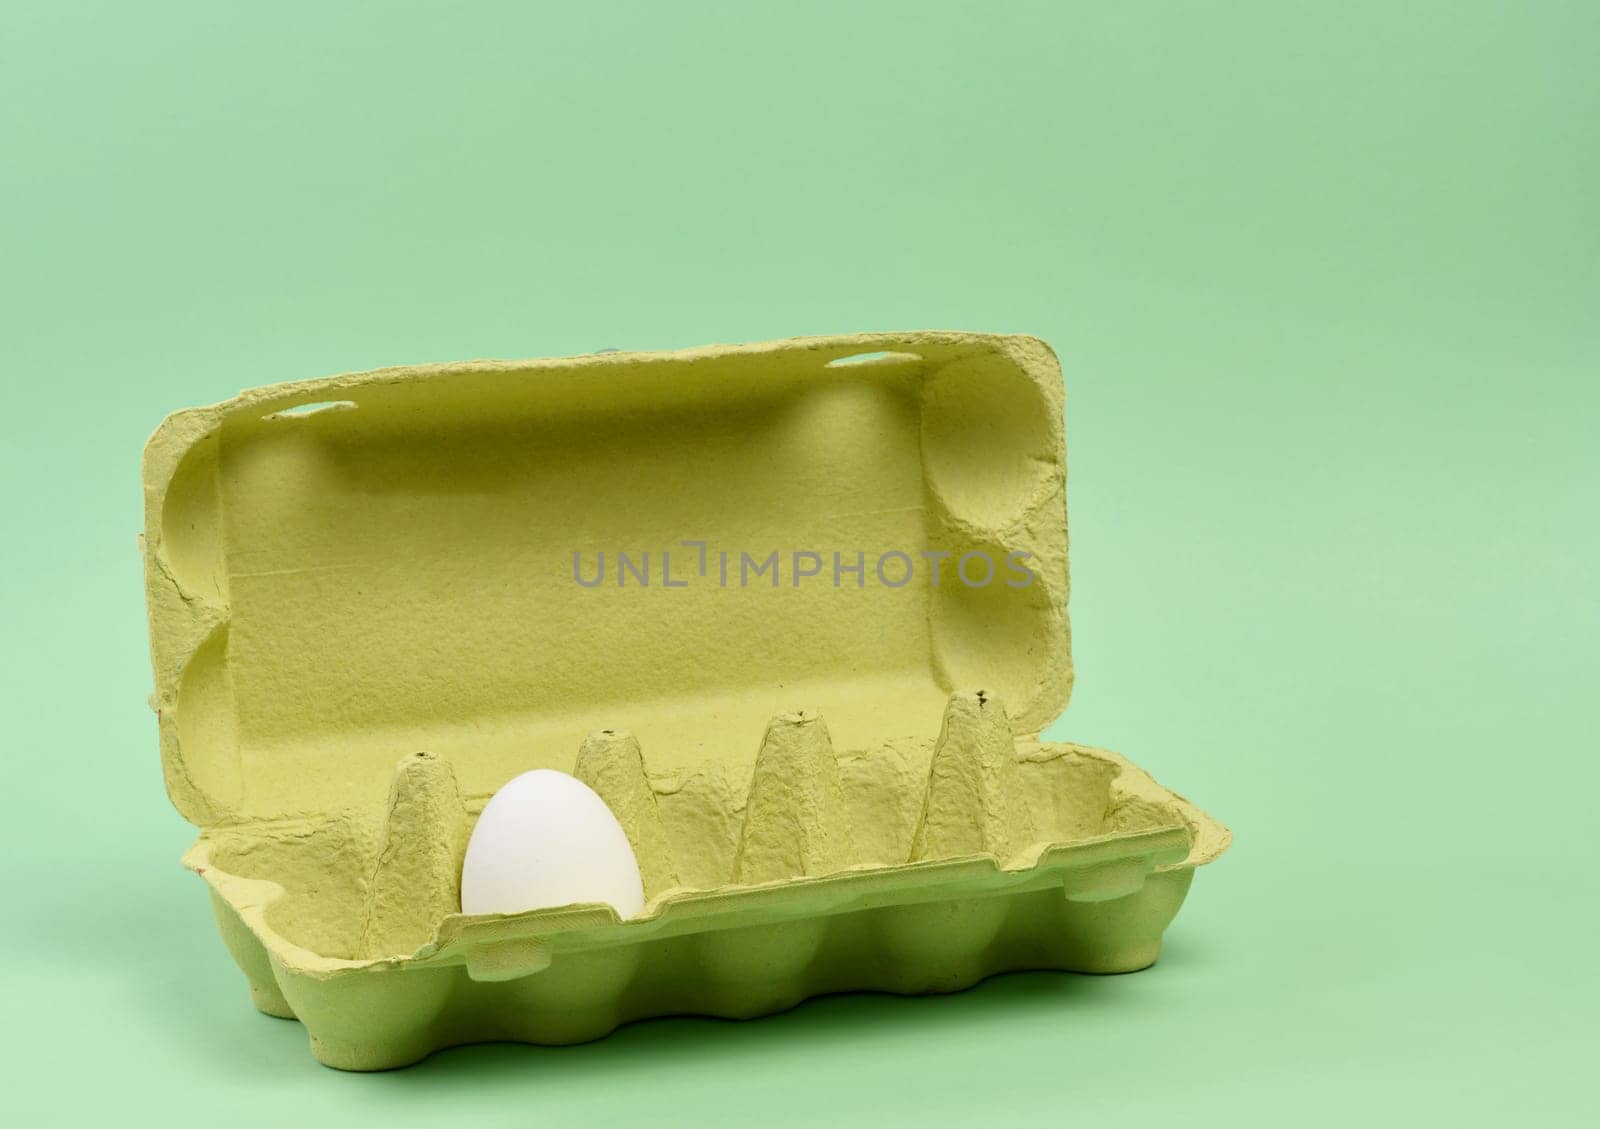 One white egg in a paper box on a green background